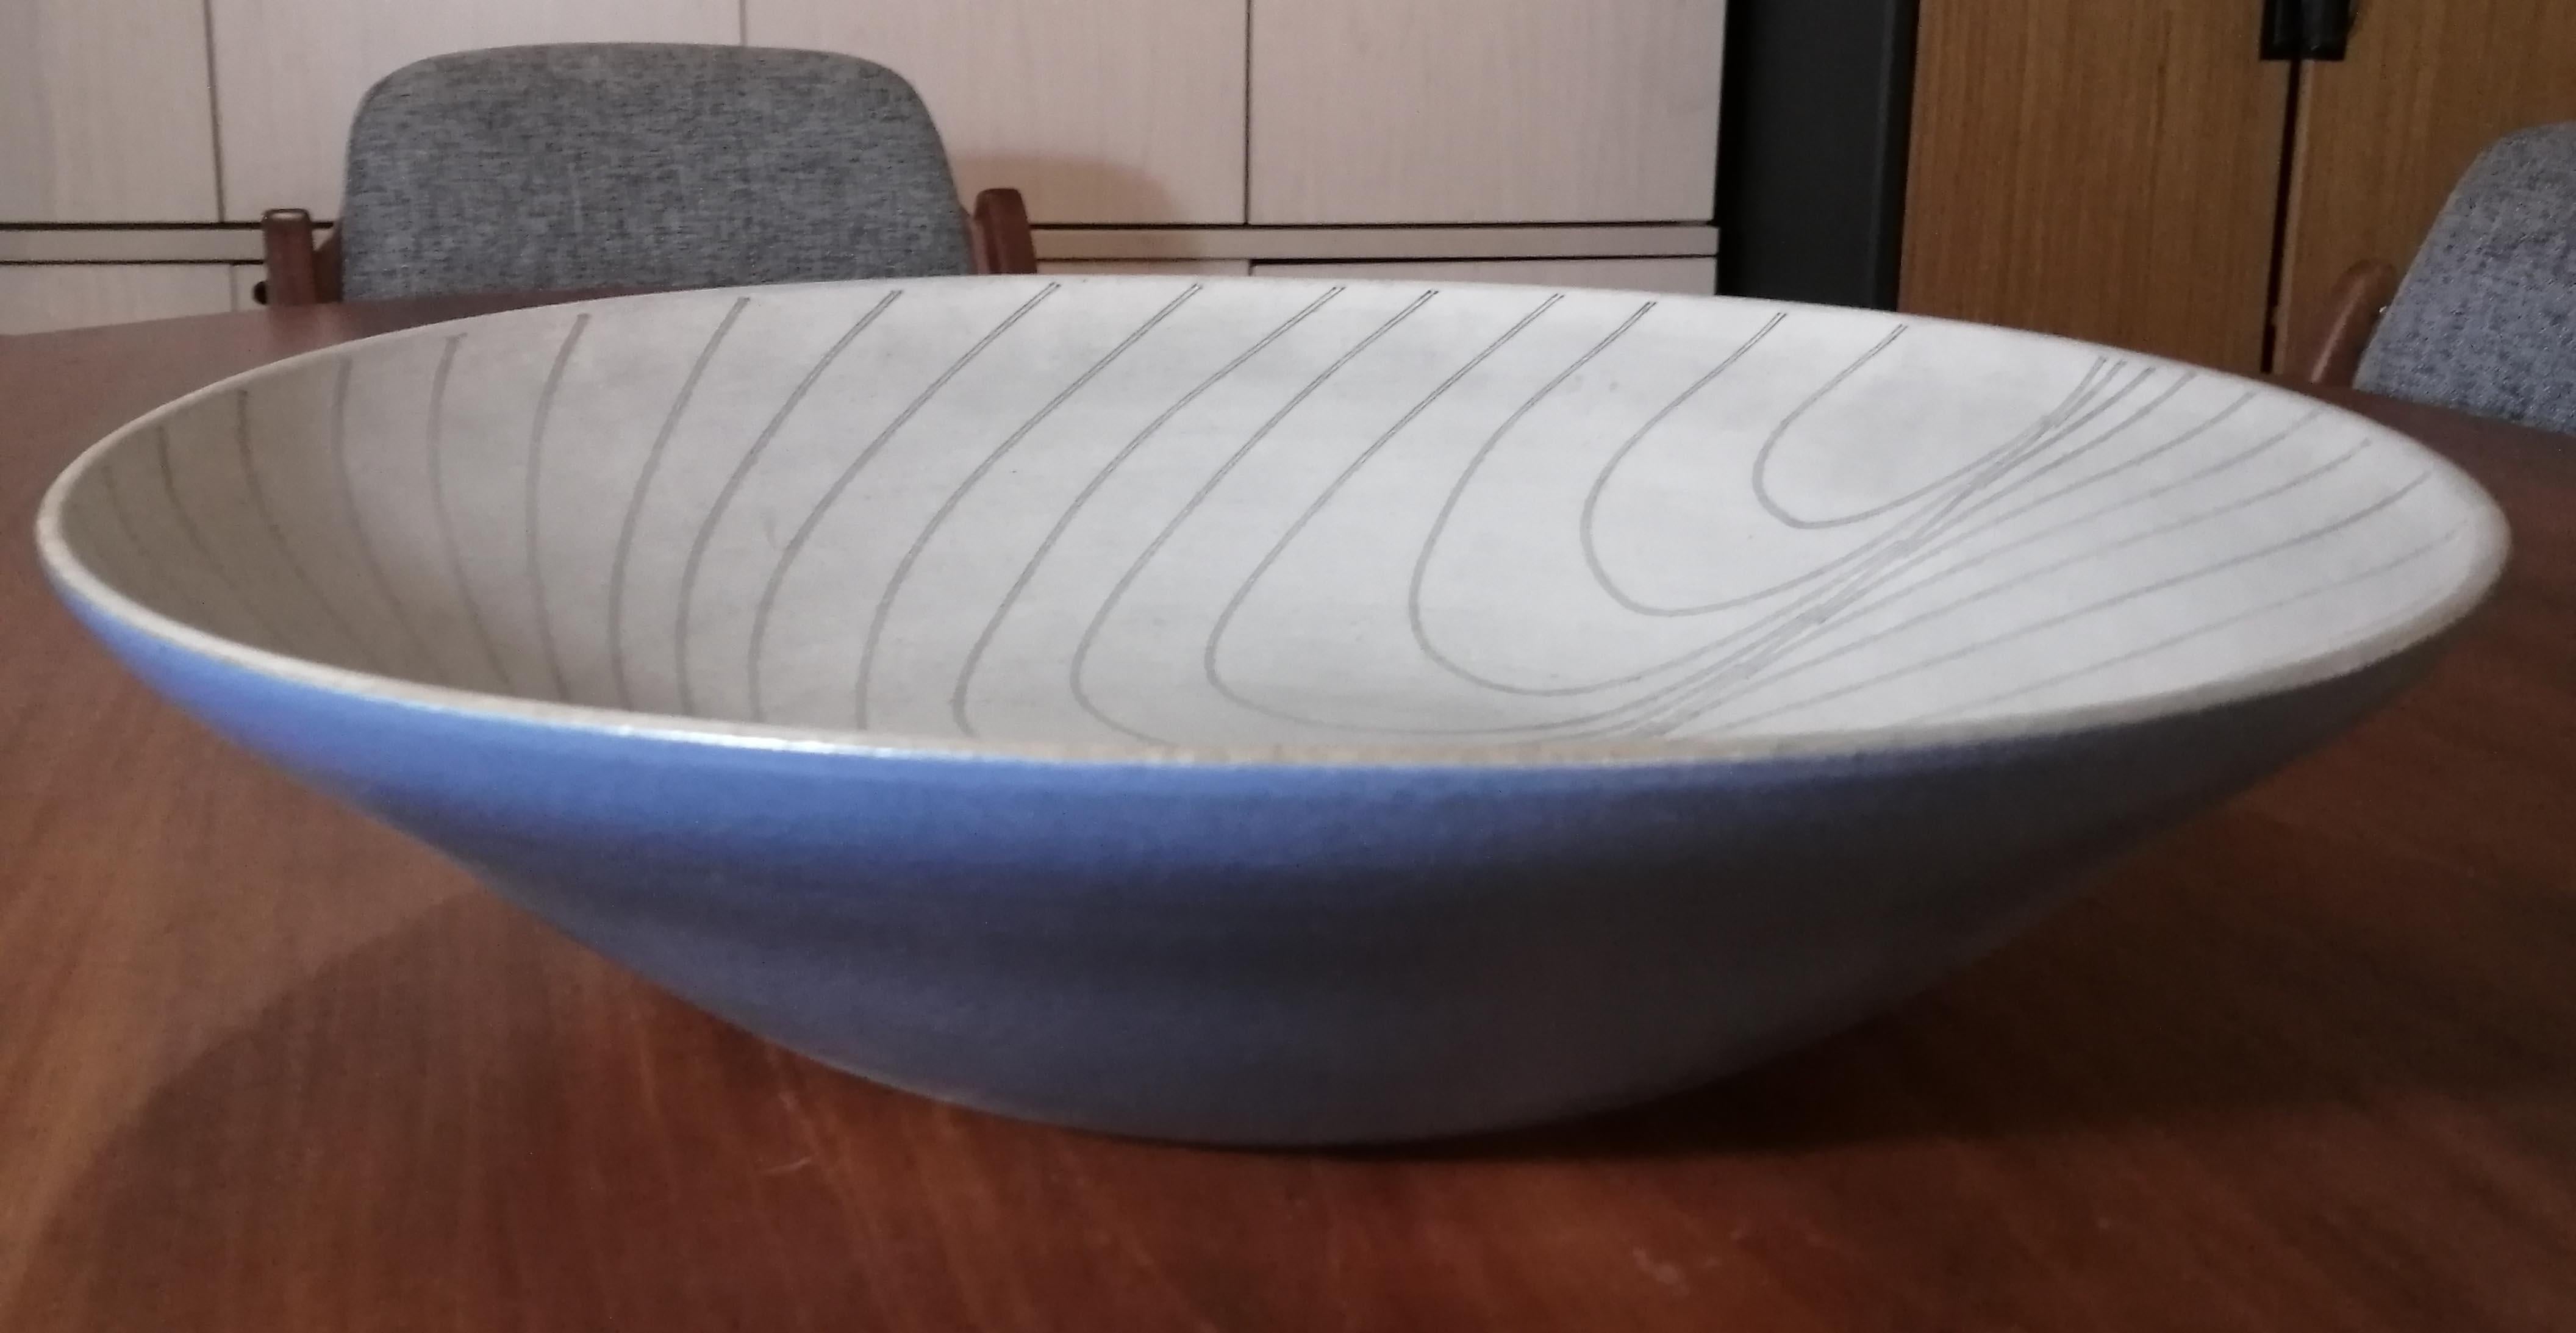 Hight temperature bowl with blue enamel on the outside and decorative frets on the inside. Numbered 745 and dated 1993.

Gustavo Pérez (Mexico City, 1950) in 1971 entered the Escuela de Diseño y Artesanias (EDA). In 1980 he acquired a scholarship to